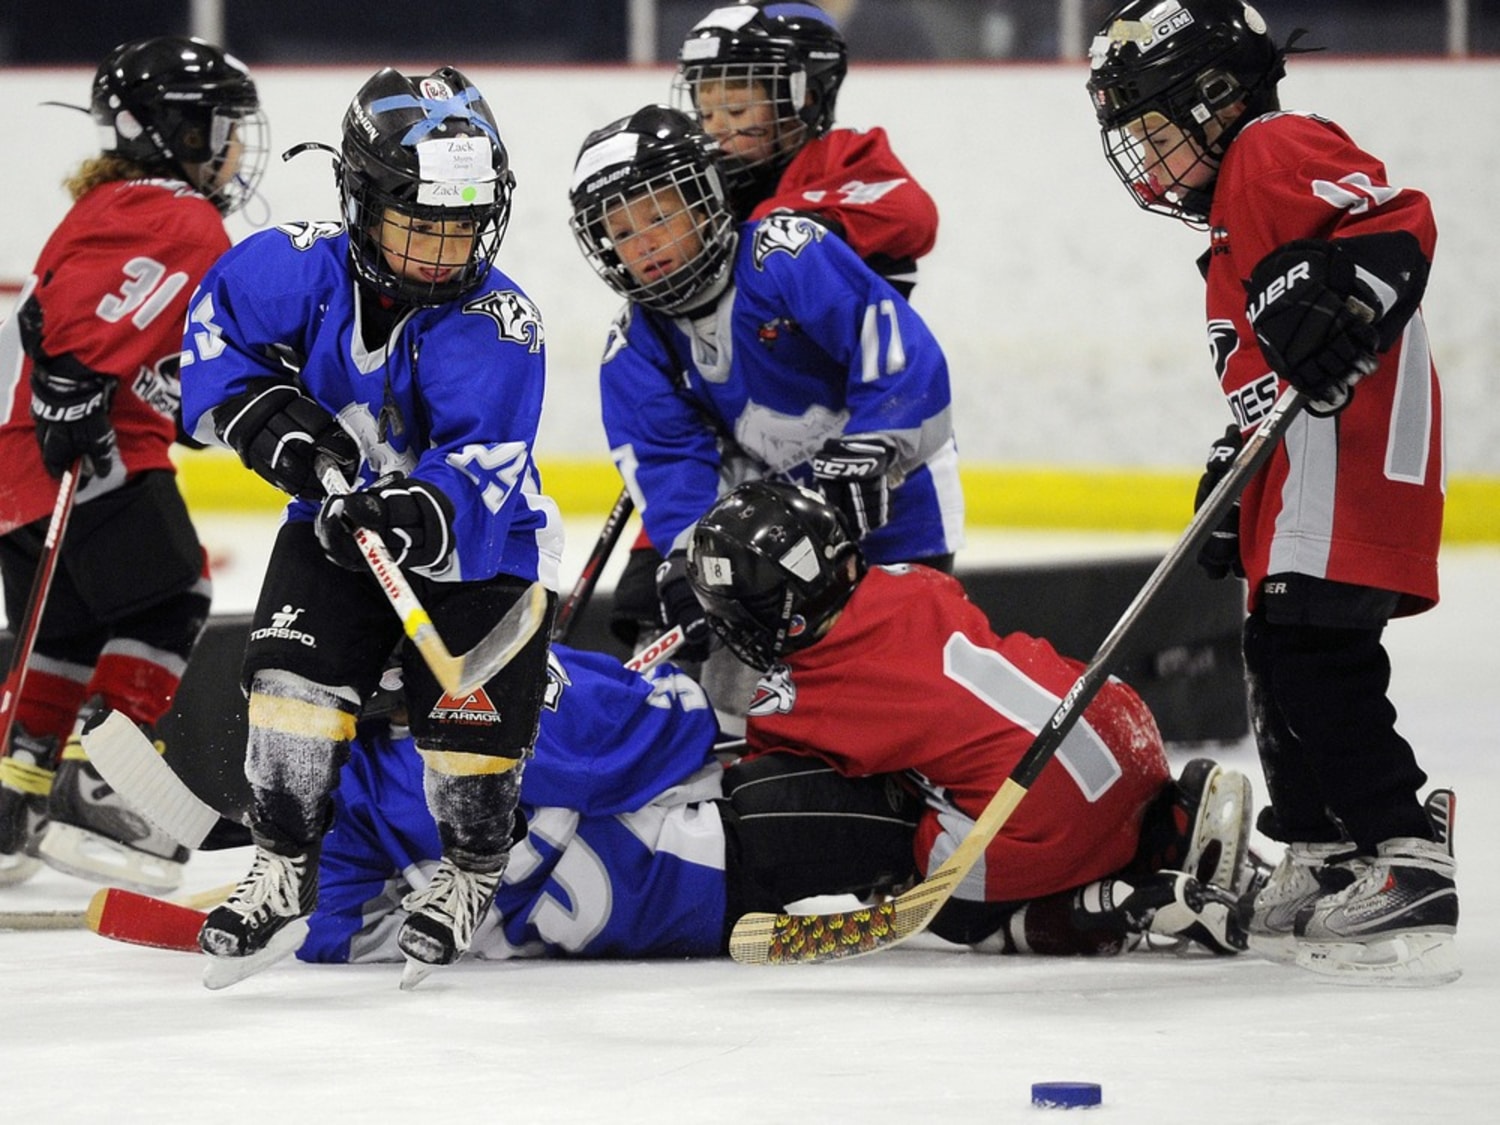 Bright Future for In-Line Hockey Has Dimmed - The New York Times